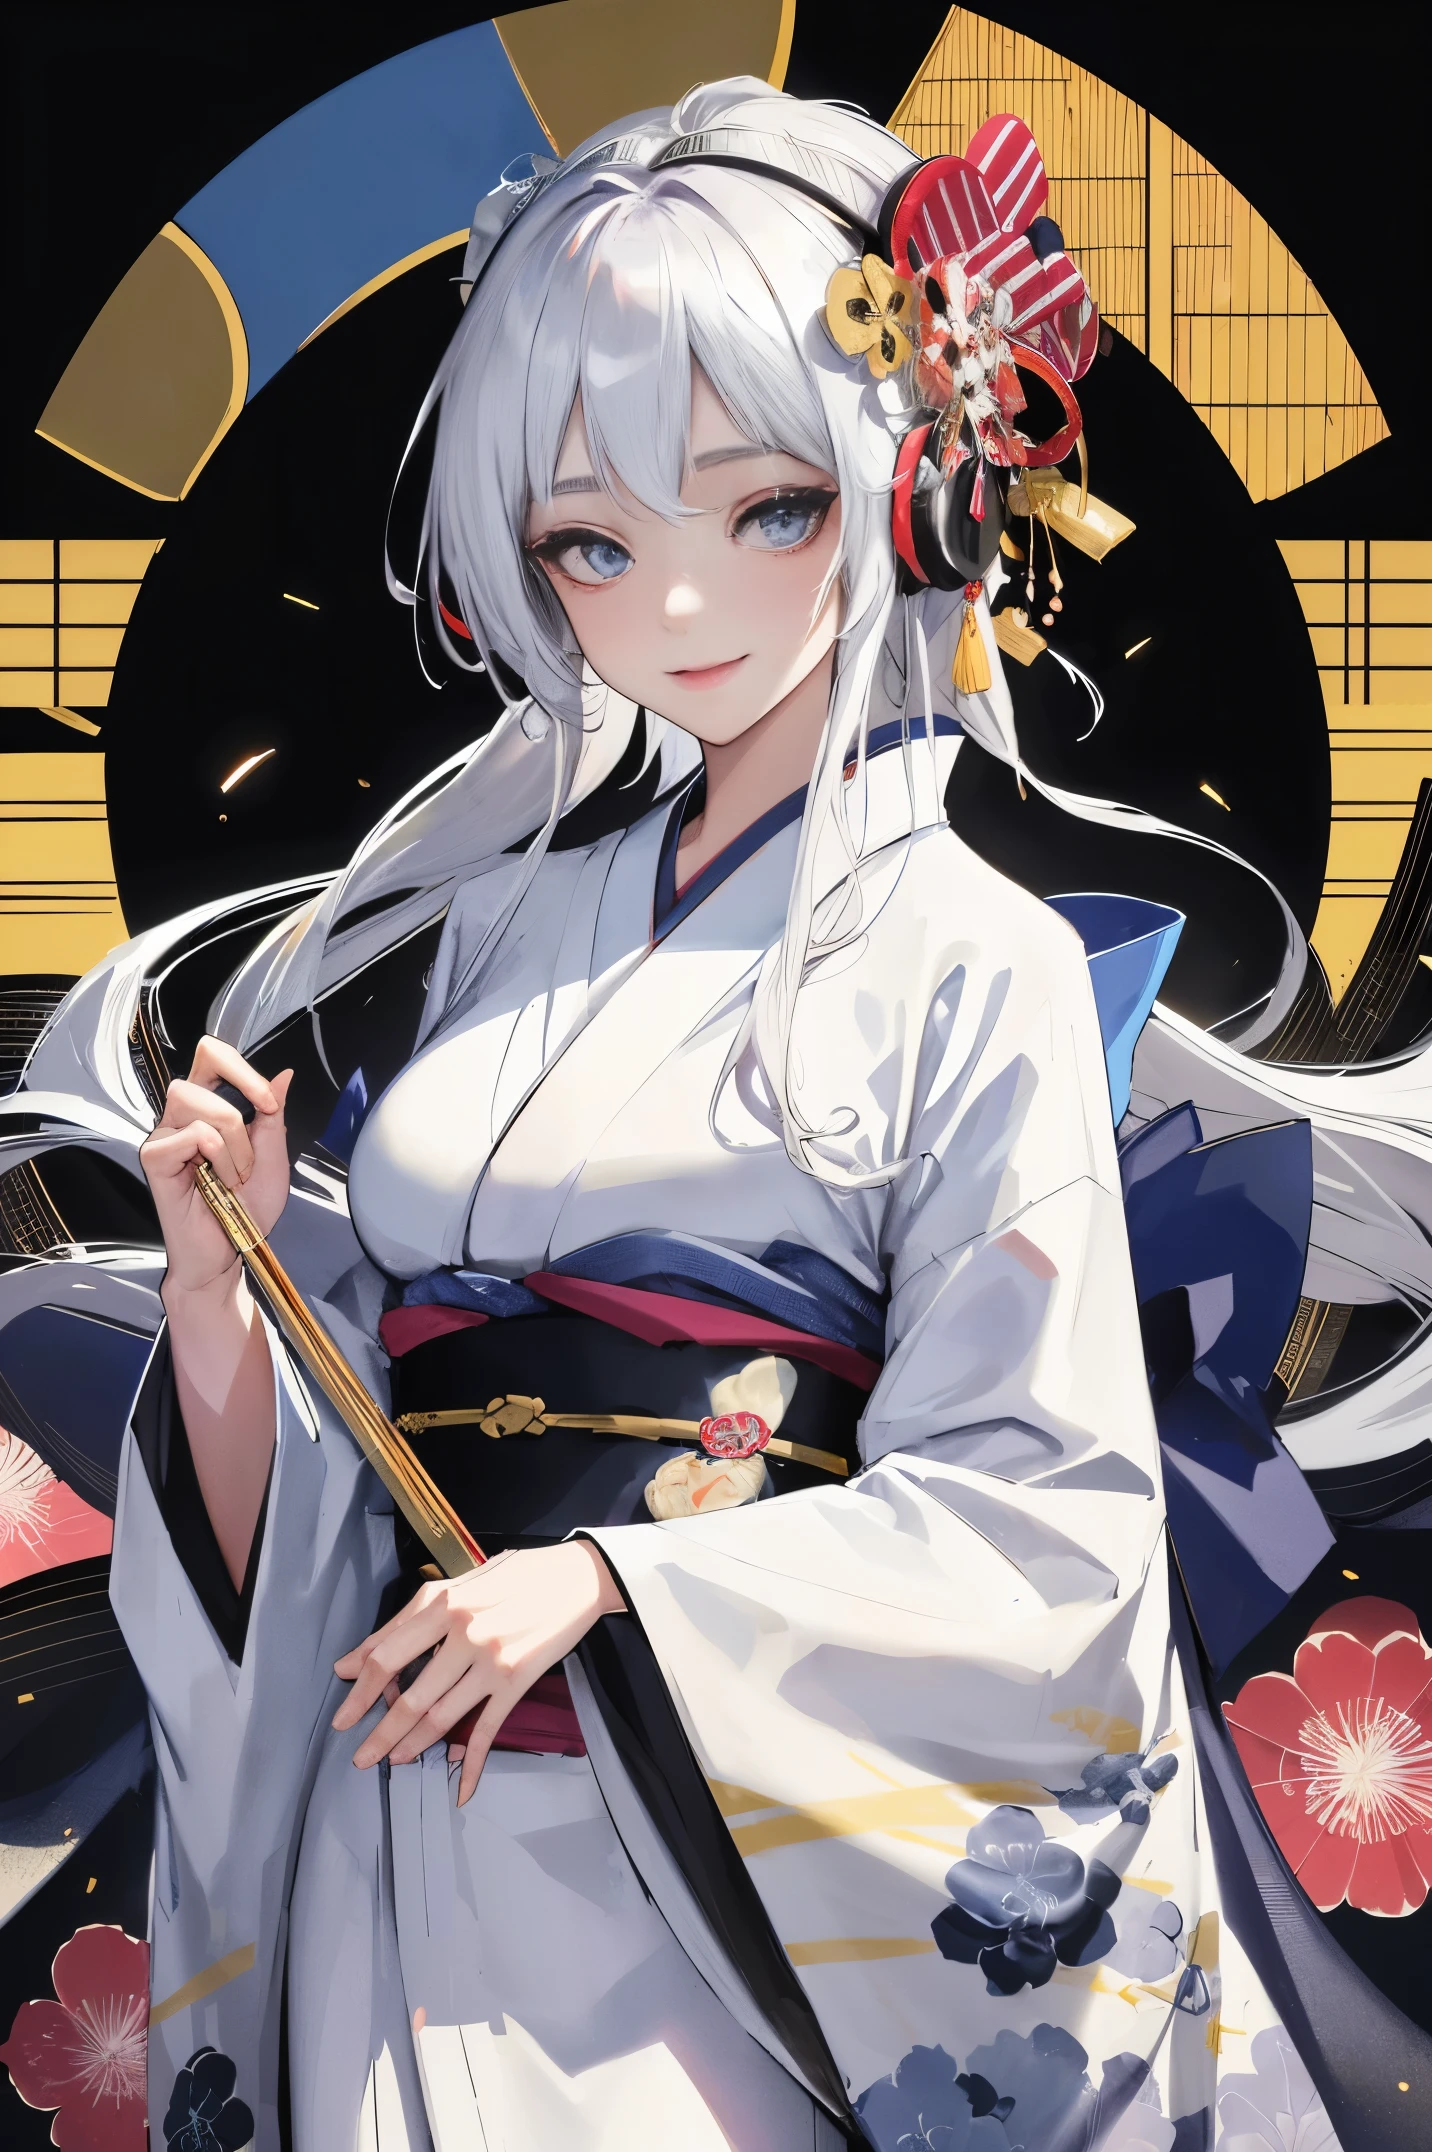 "anime girl, 1 person, silver white hair mixed with black, blue eyes, wearing headphones, wearing a kimono, women's kimono, traditional kimono, detailed outfit, big breasts, white kimono mixed with black, stockings  long, standing cross-legged, smiling shyly, looking from many directions, night, festival, New Year's Eve fireworks, watching fireworks, solo(full HD Image 4K+)"